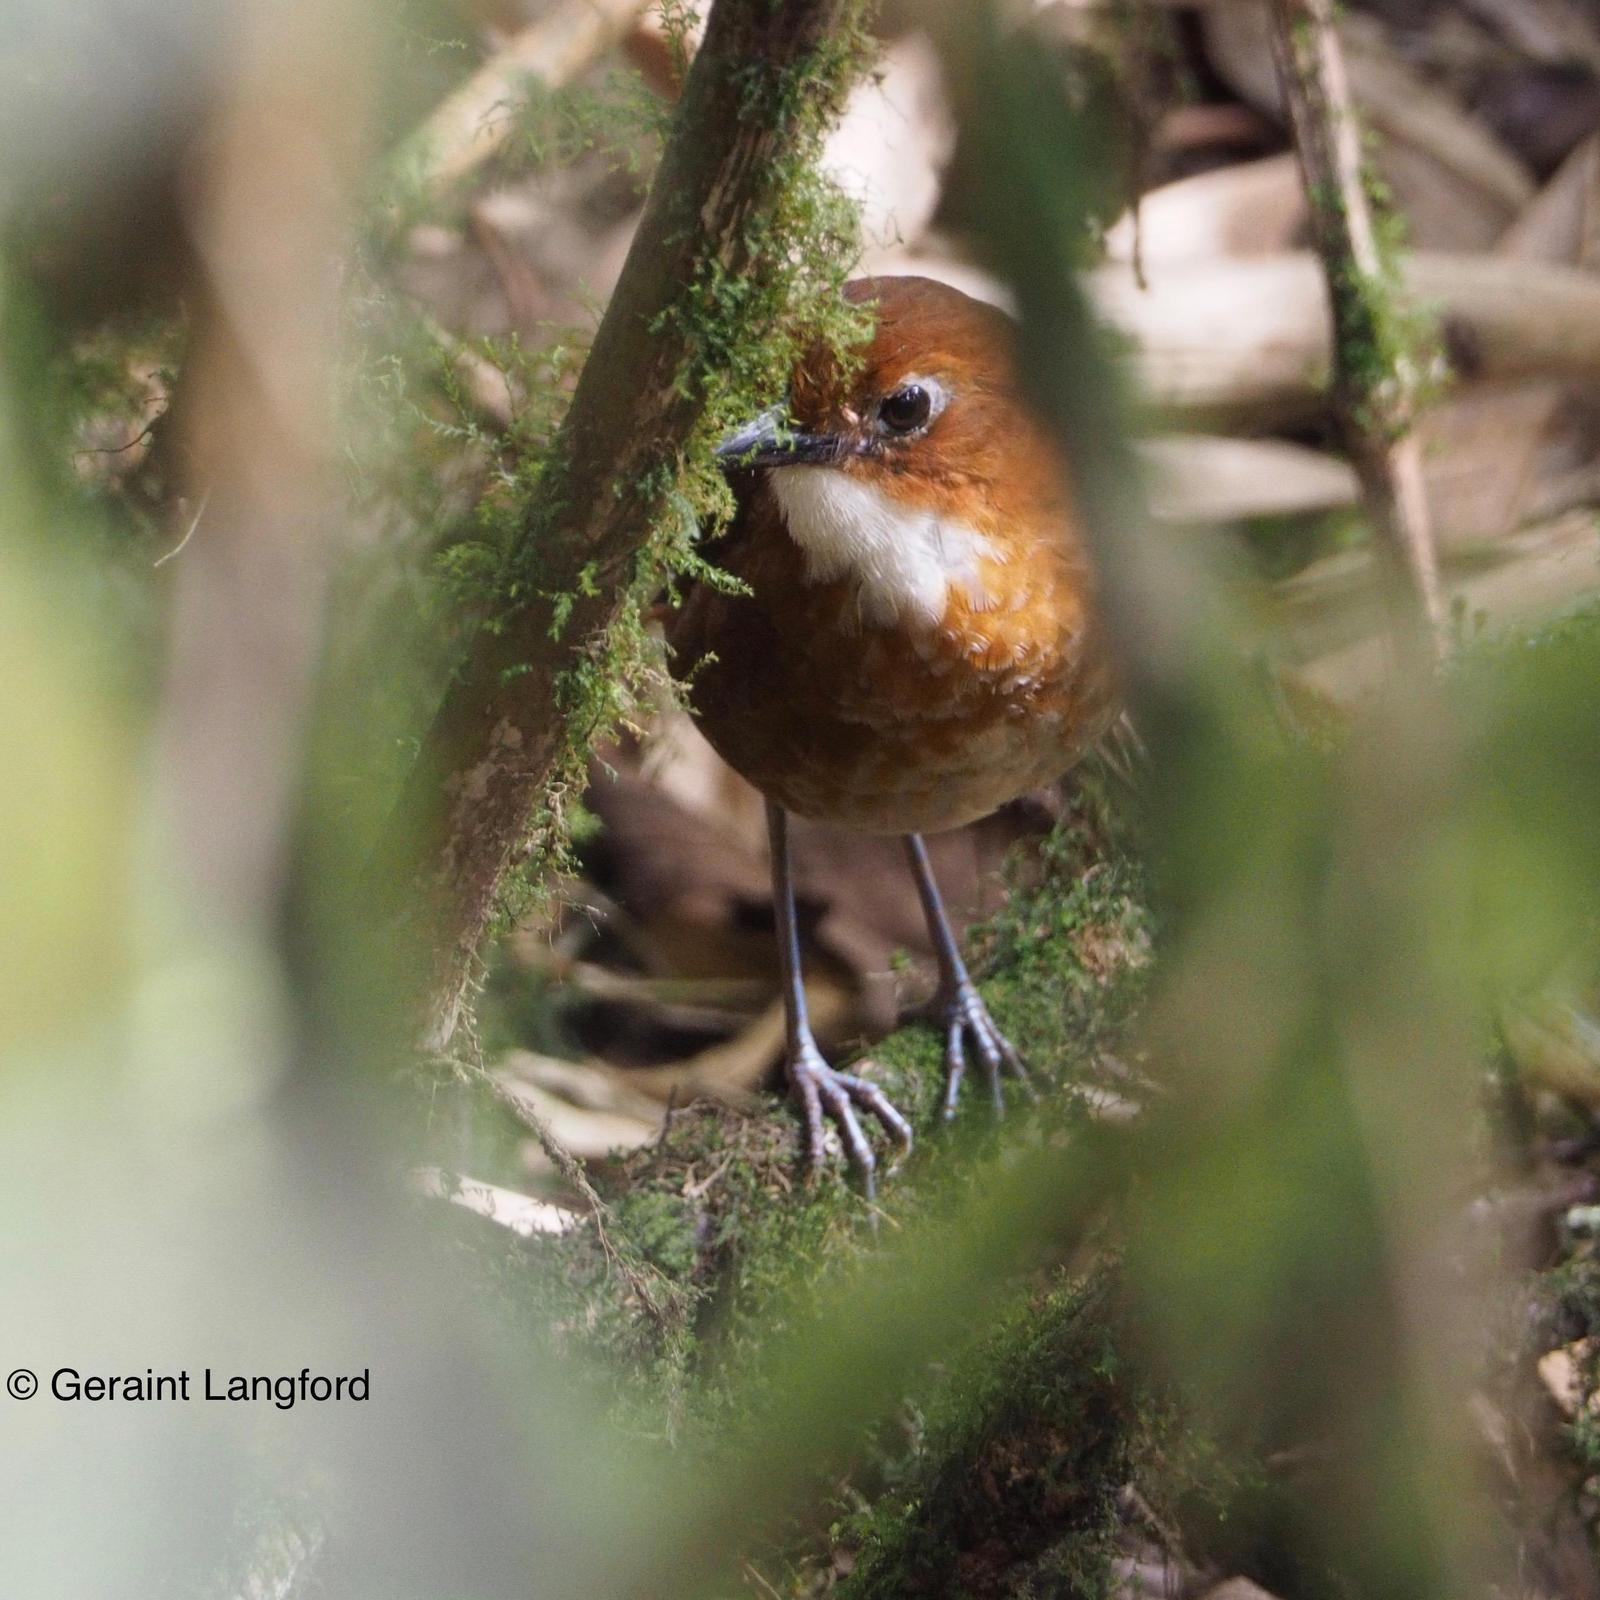 Red-and-white Antpitta Photo by Geraint Langford